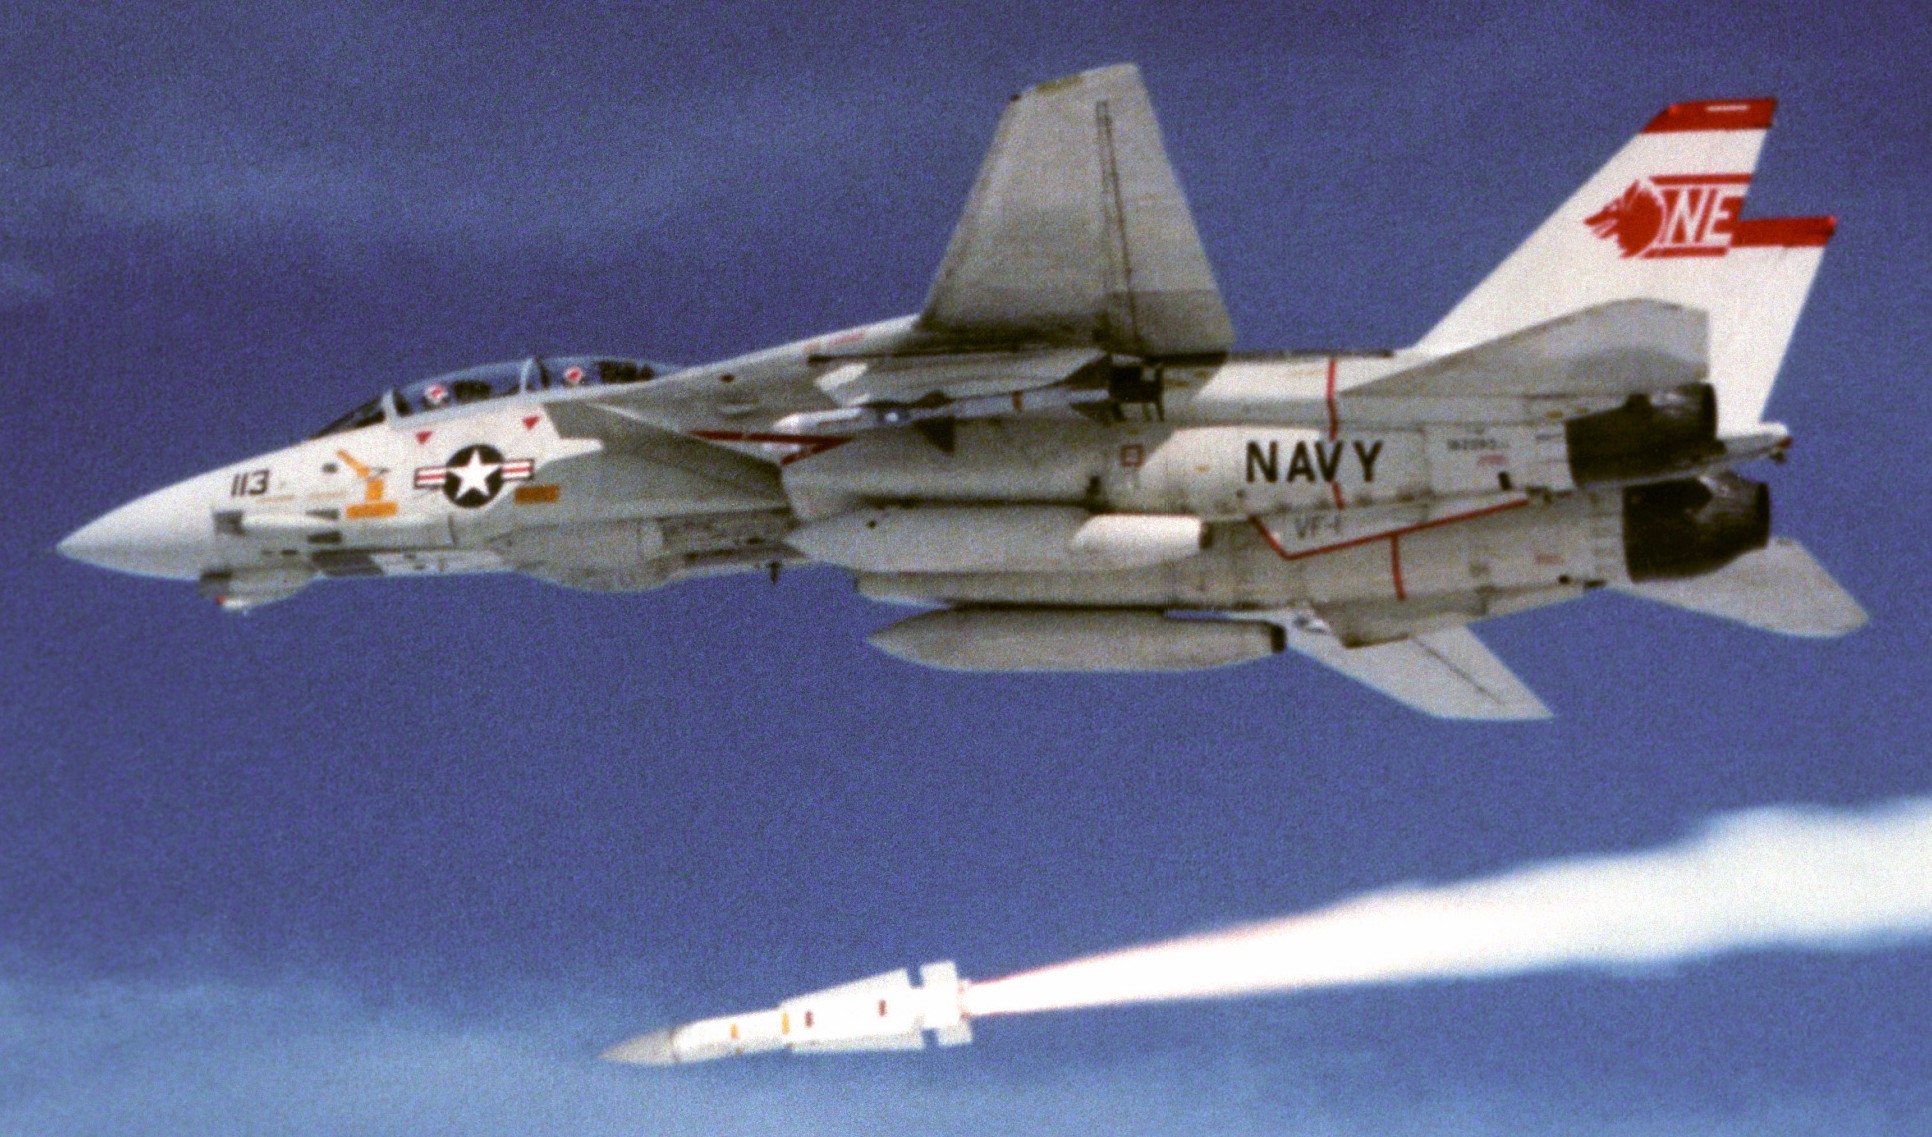 vf-1 wolfpack fighter squadron f-14a tomcat carrier air wing cvw-2 uss ranger cv-61 26